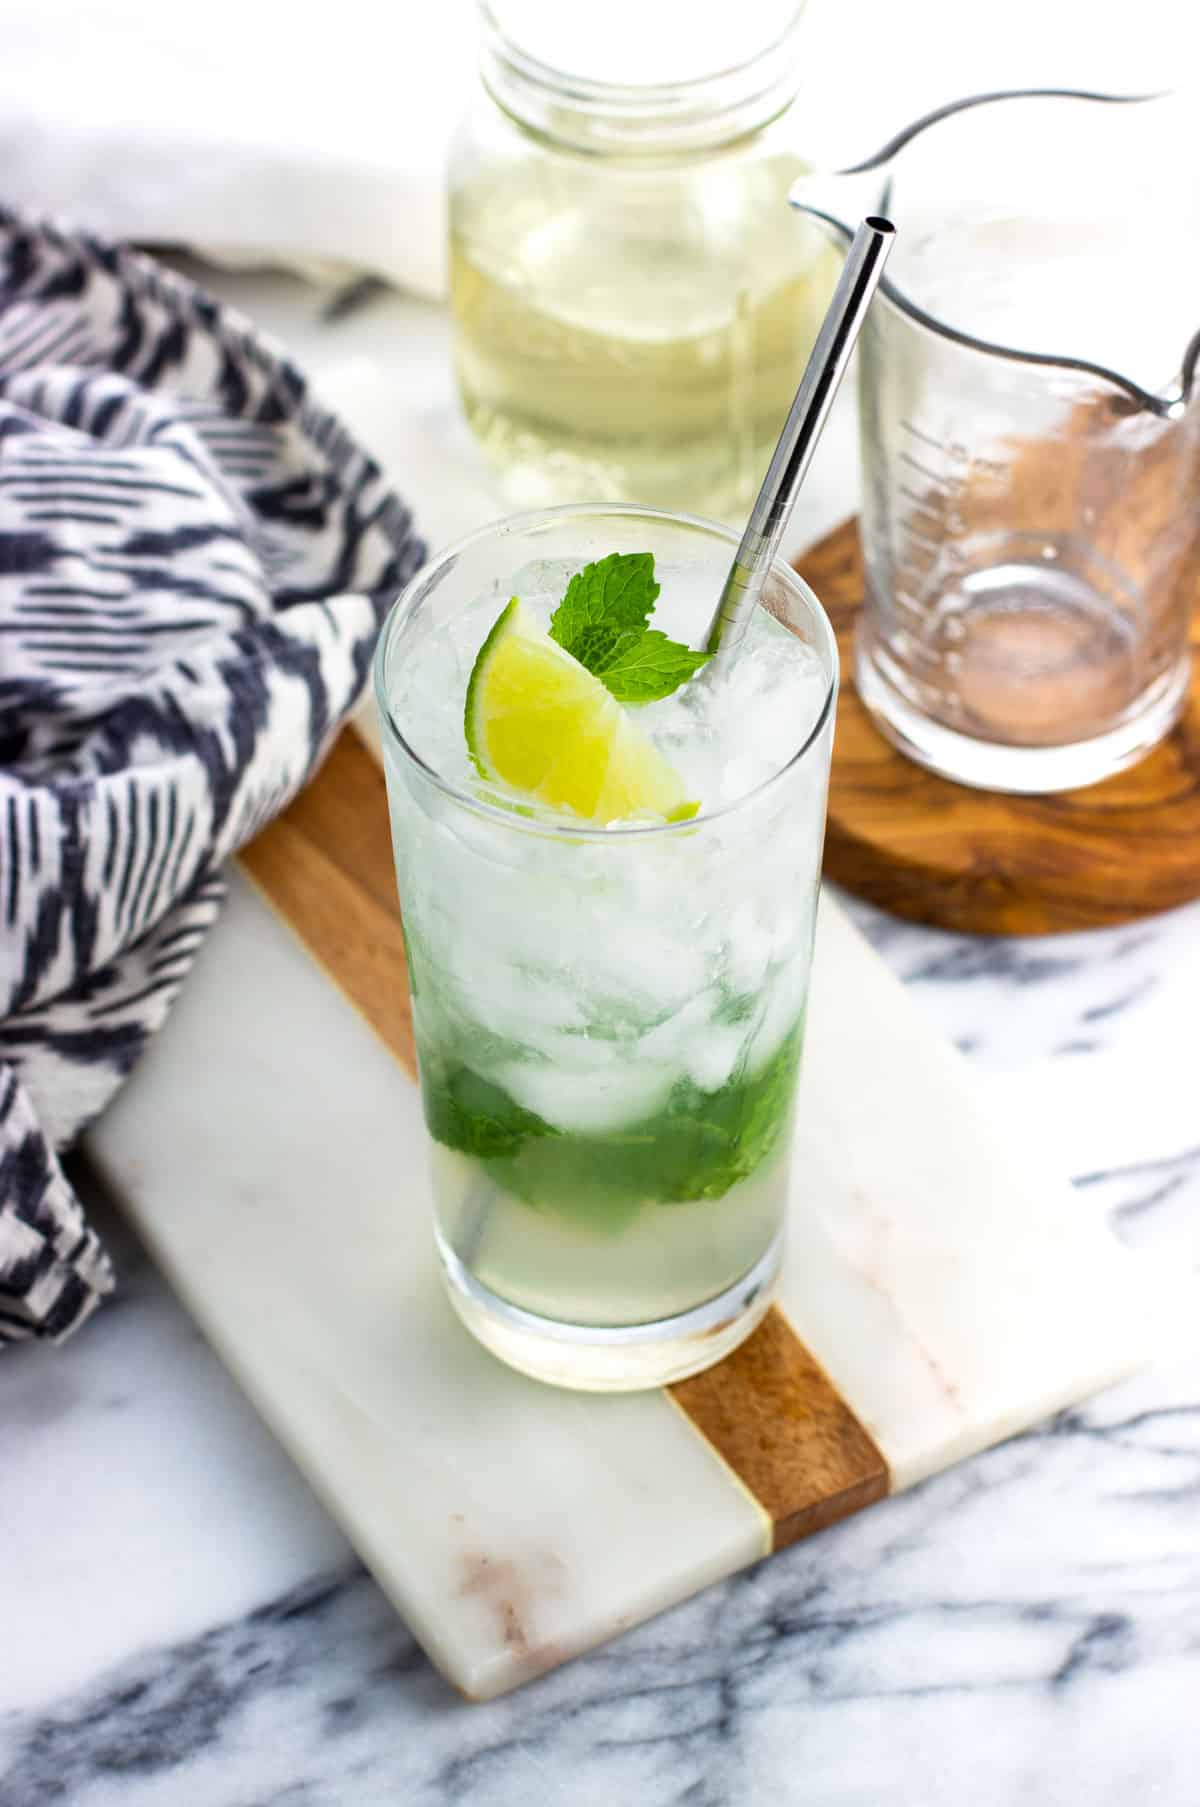 A mojito mocktail garnished with lime and mint leaves with a metal straw.